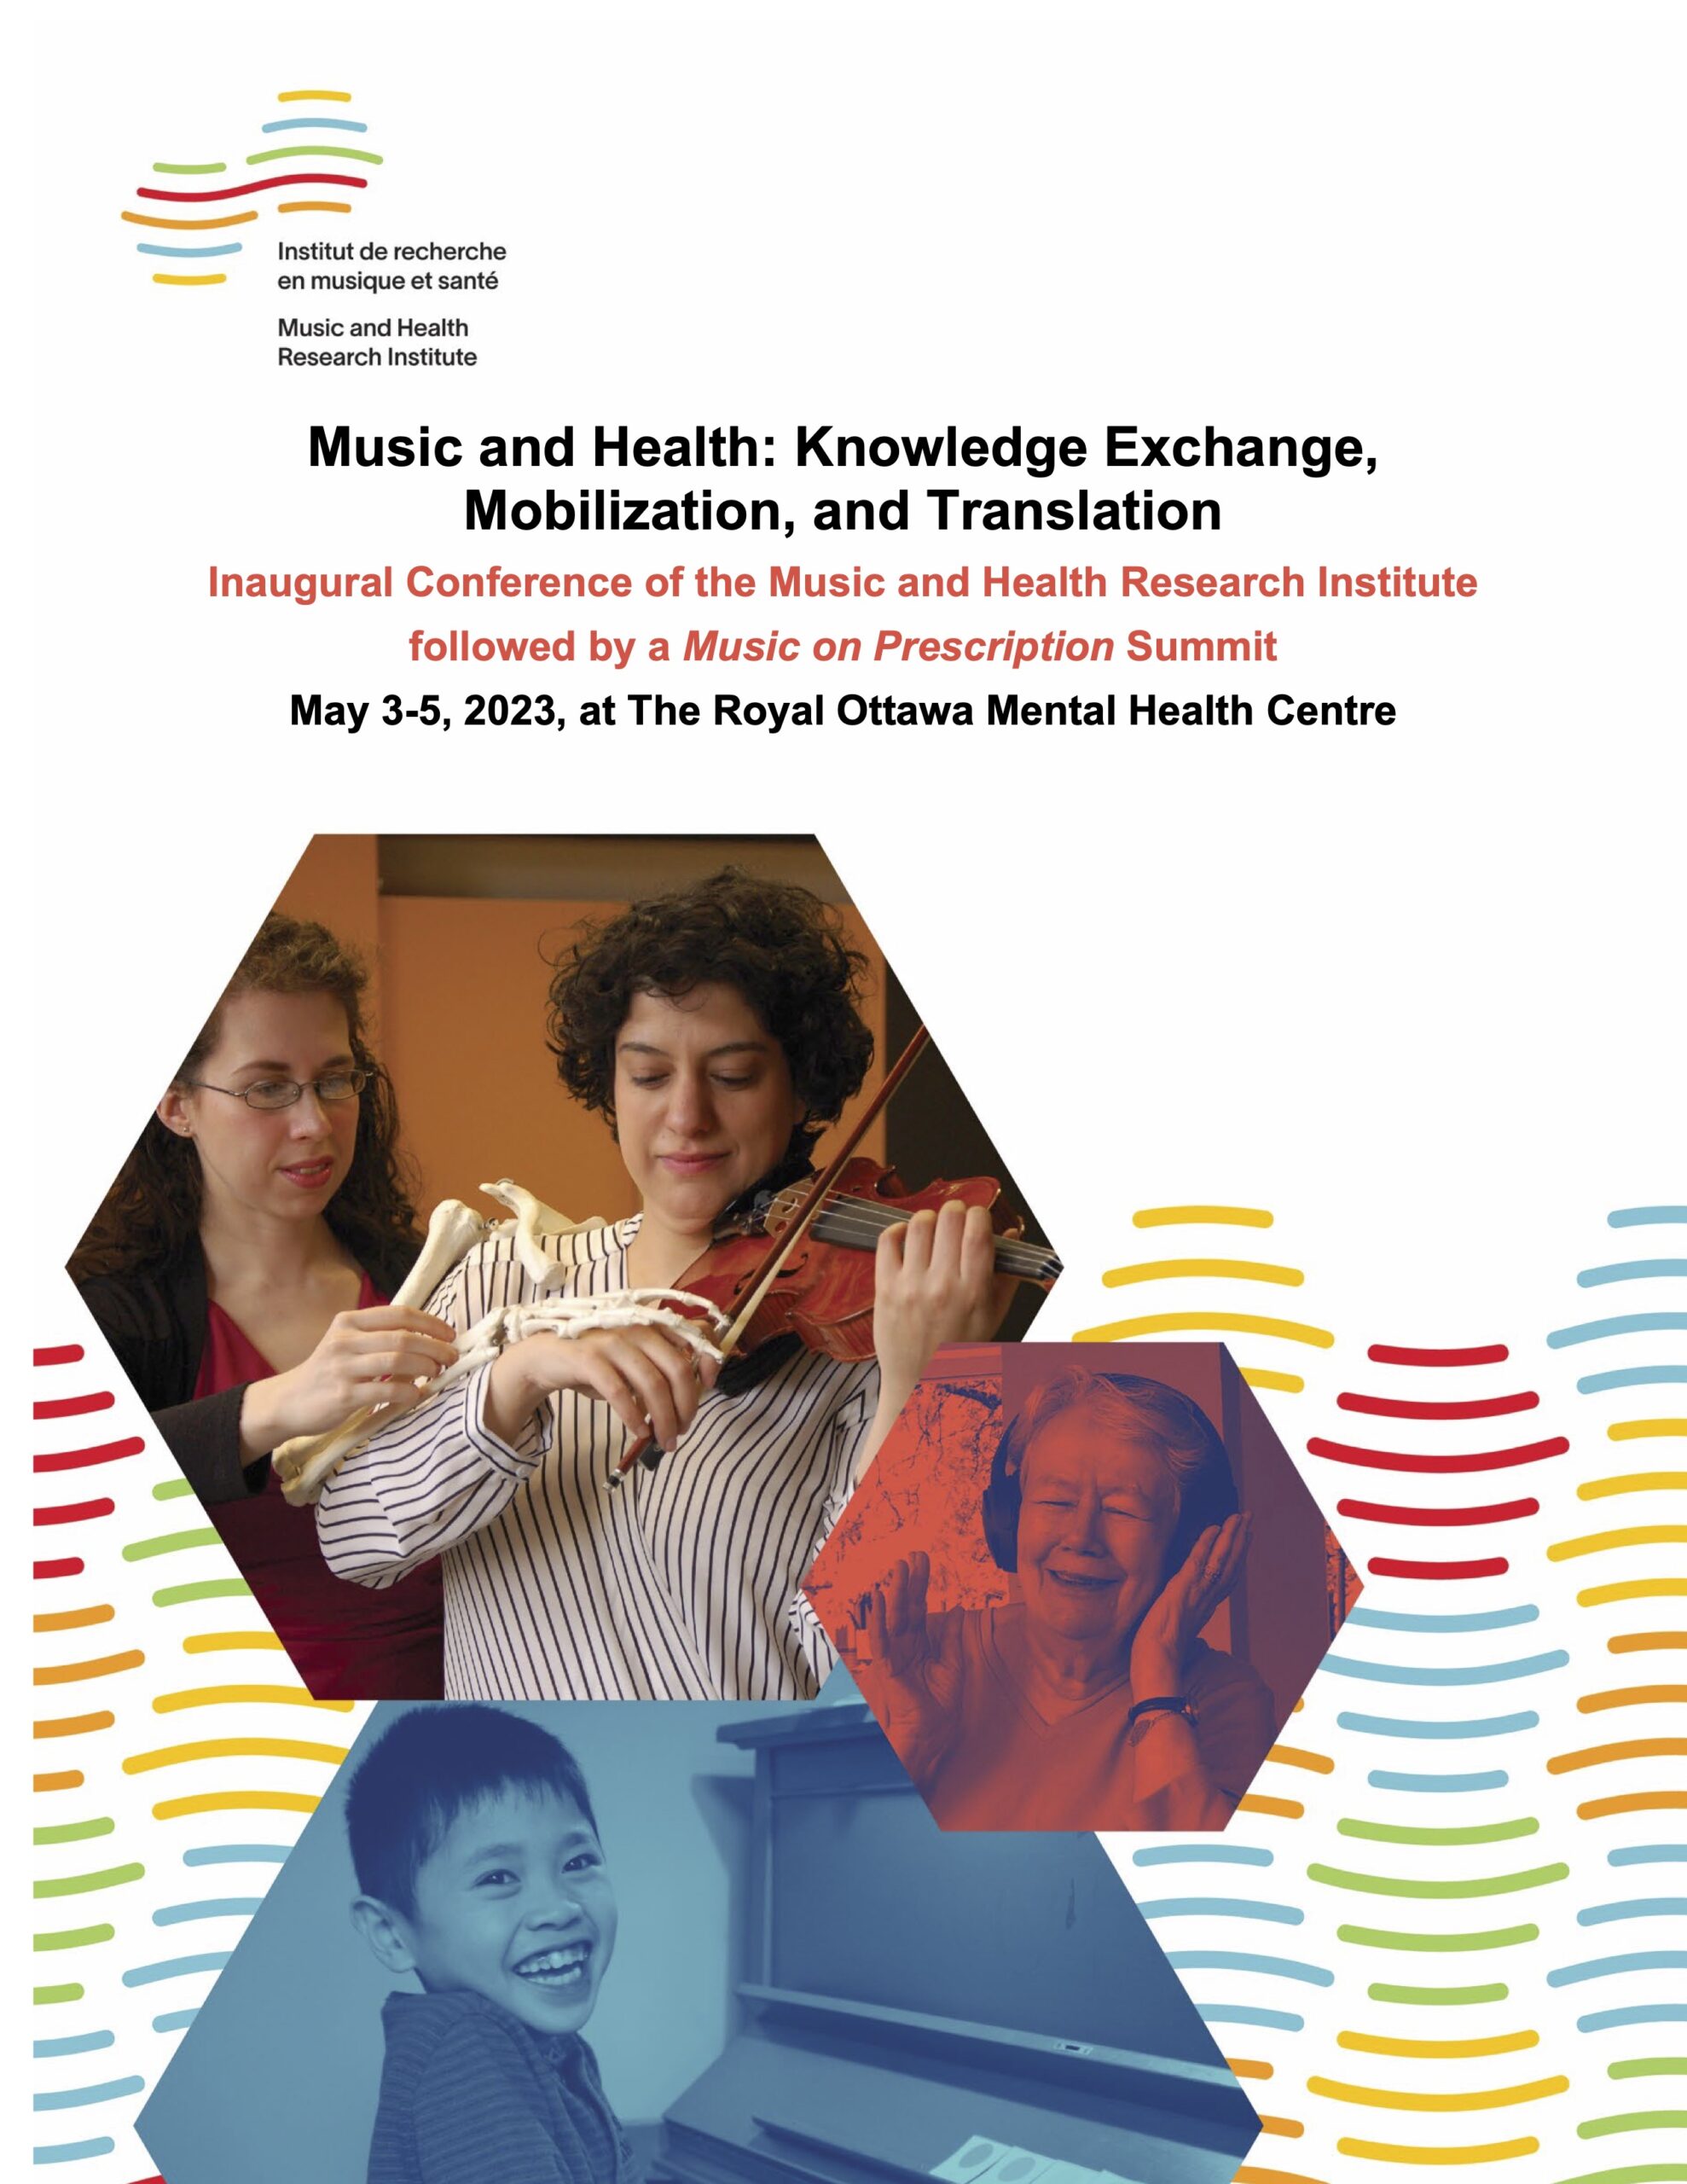 Music and Health Conference Poster. It says: "Music and Health: Knowledge Exchange, Mobilization, and Translation, Inaugural Conference of the Music and Health Research Institute followed by a Music on Prescription Summit, May 3-5, 2023, at The Royal Ottawa Mental Health Centre